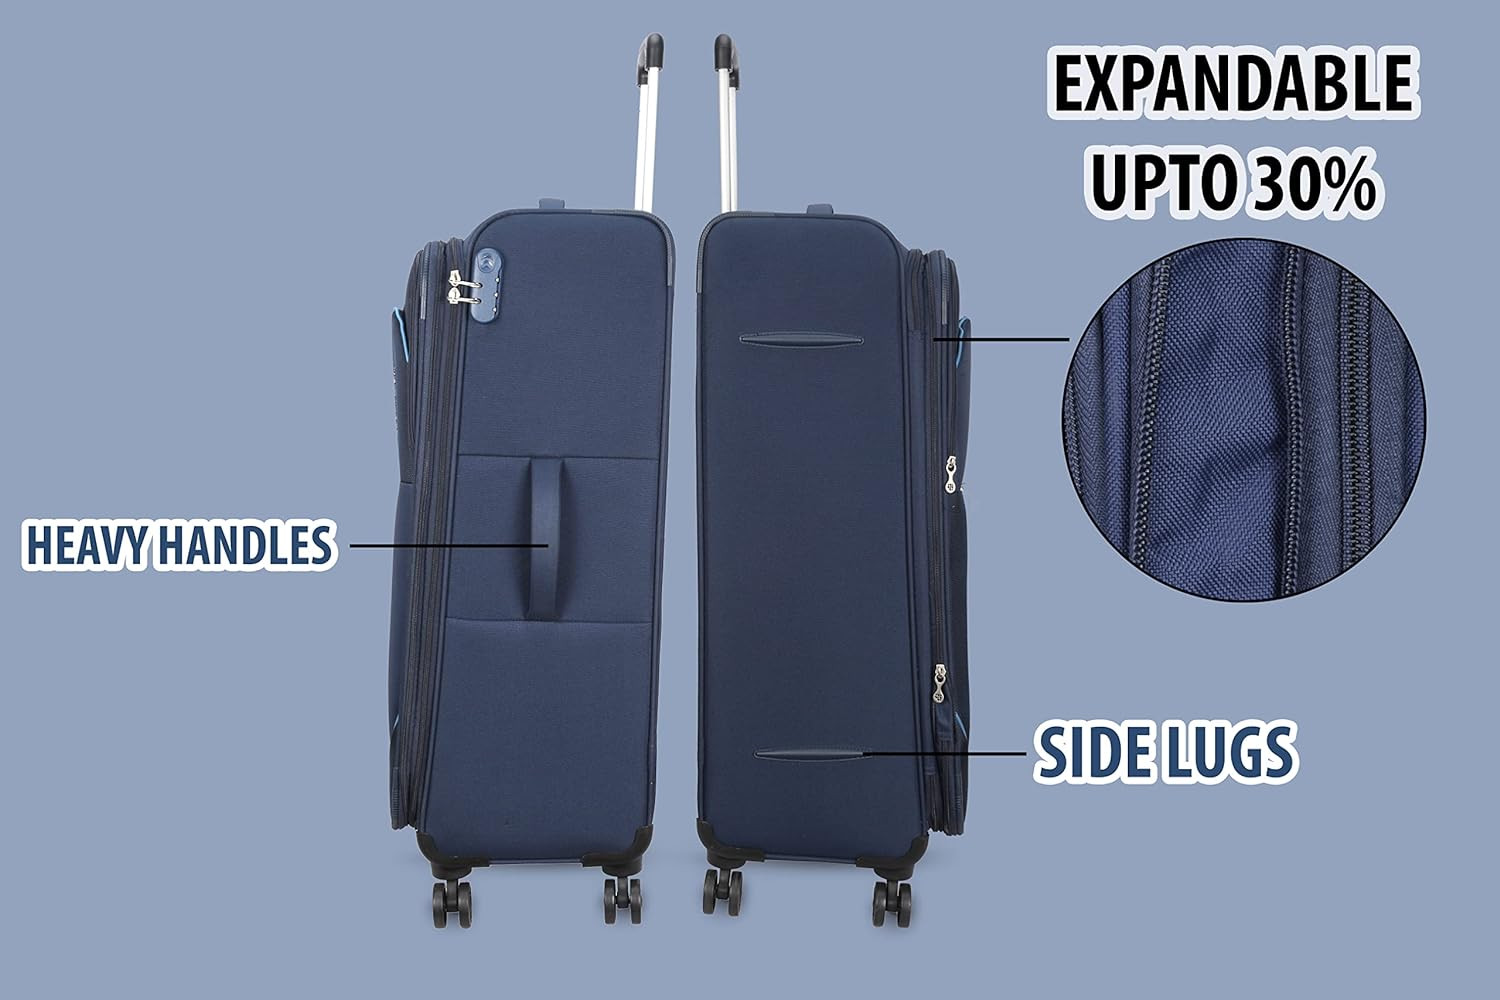 American Tourister Kamiliant 3 Pieces Set-Polyester Small 56 cm Medium 68 cm  Large 79 cm Softsided Luggage Trolley Blue